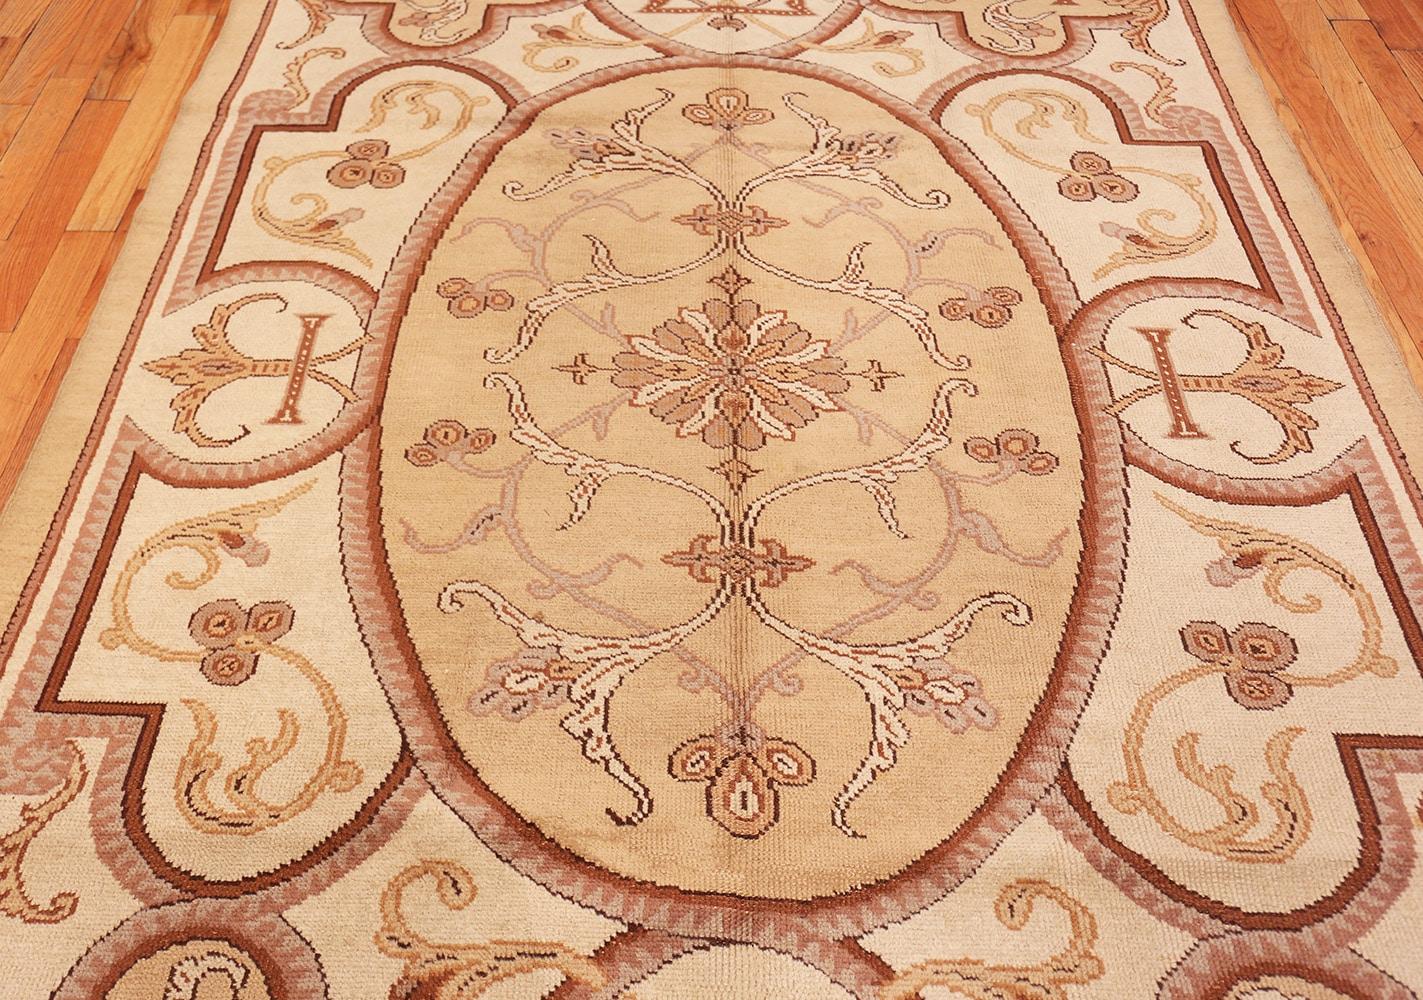 Hand-Knotted Vintage Art Deco French Rug. Size: 6 ft 4 in x 9 ft 8 in (1.93 m x 2.95 m)